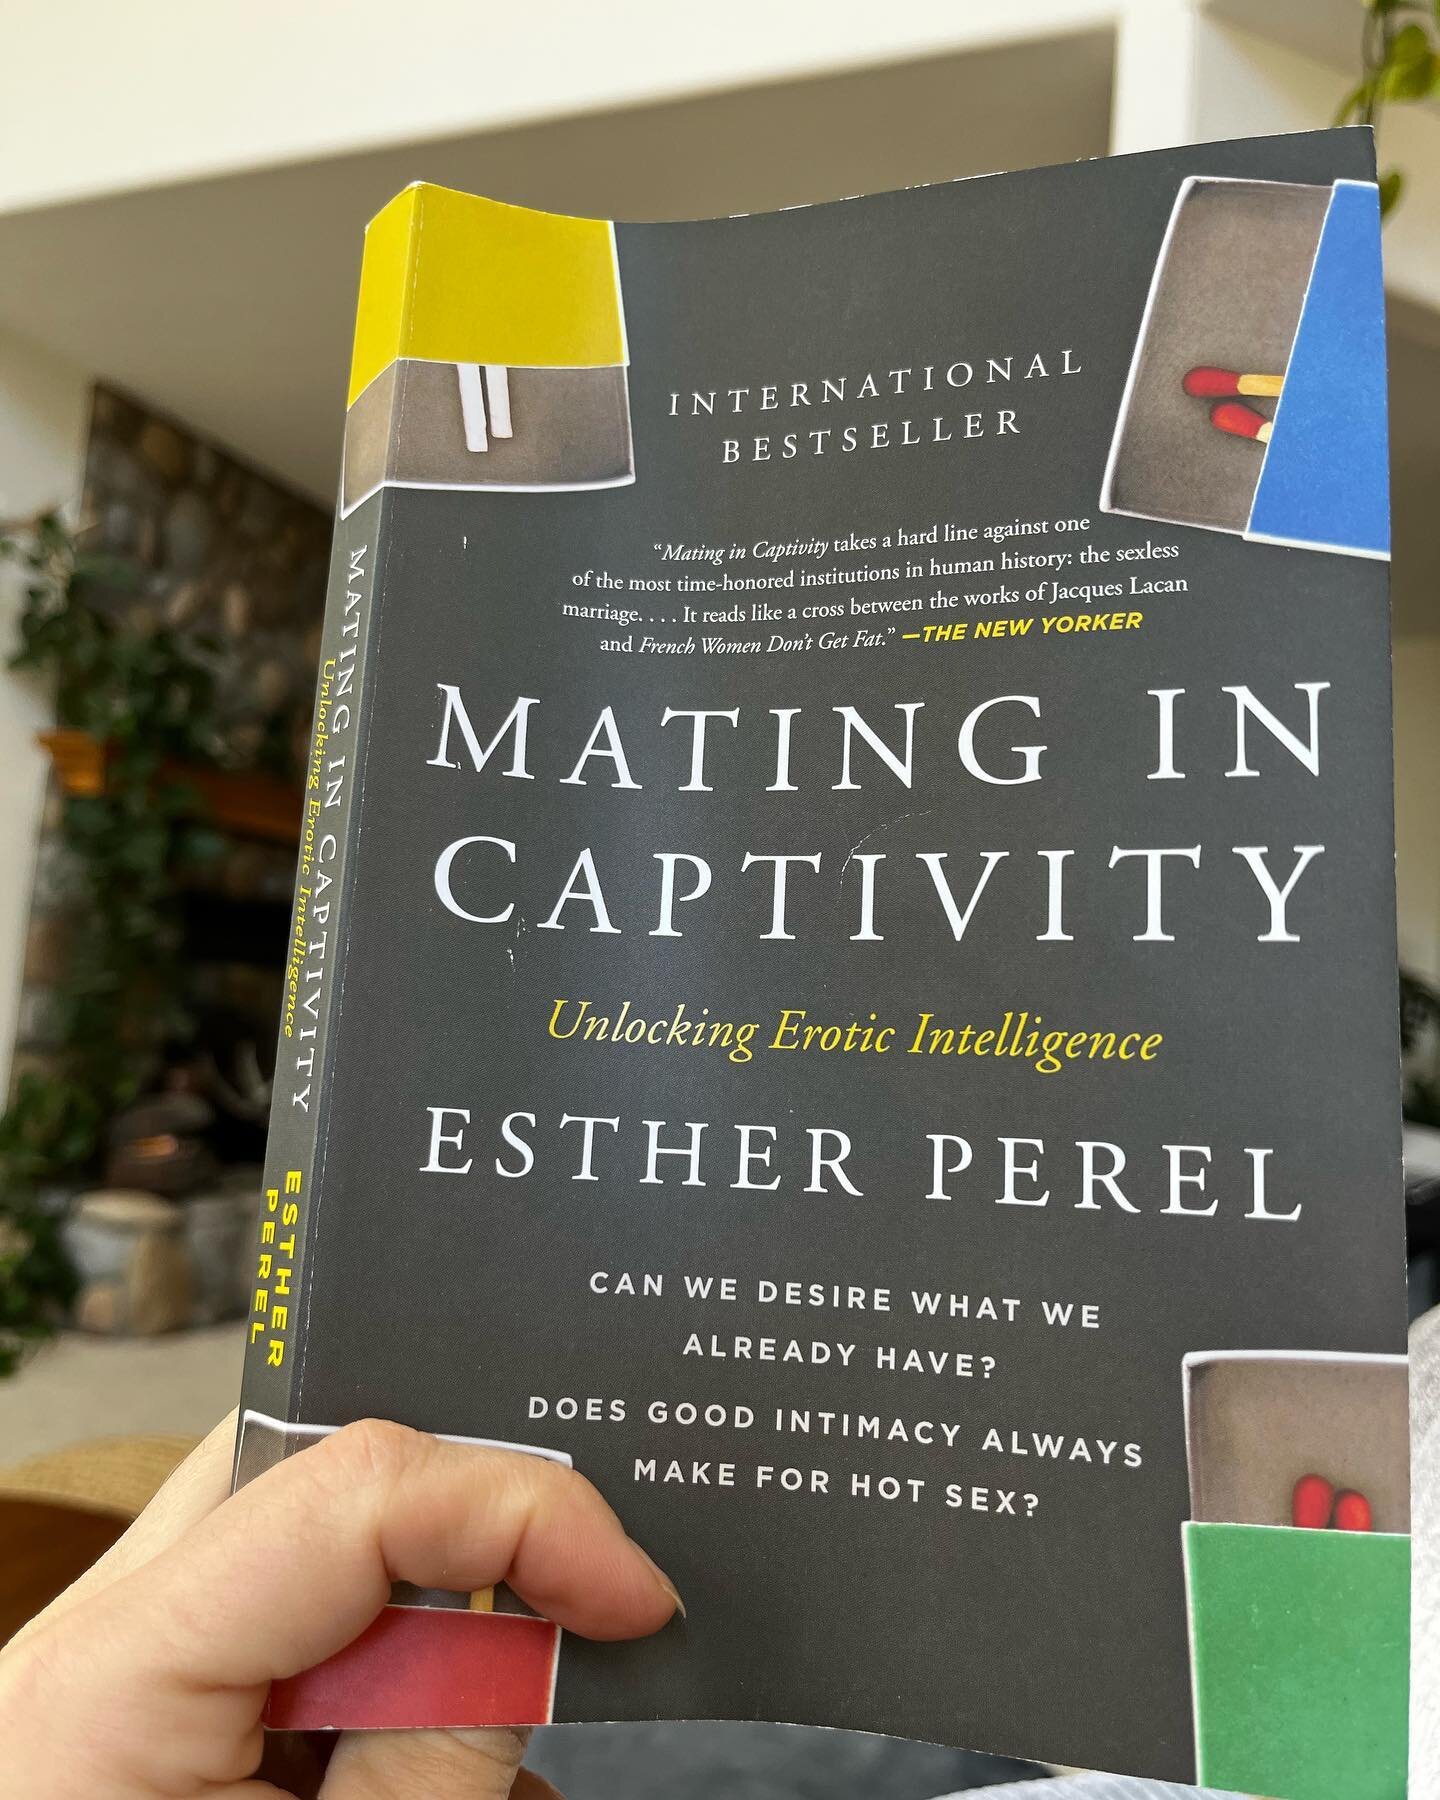 Decentralizing the male narrative stronghold on Therapy feels important to me. We need more diversity in therapy and approaches to healing. It&rsquo;s refreshing to read Esther&rsquo;s perspective on intimacy and eroticism. Great read for those feeli